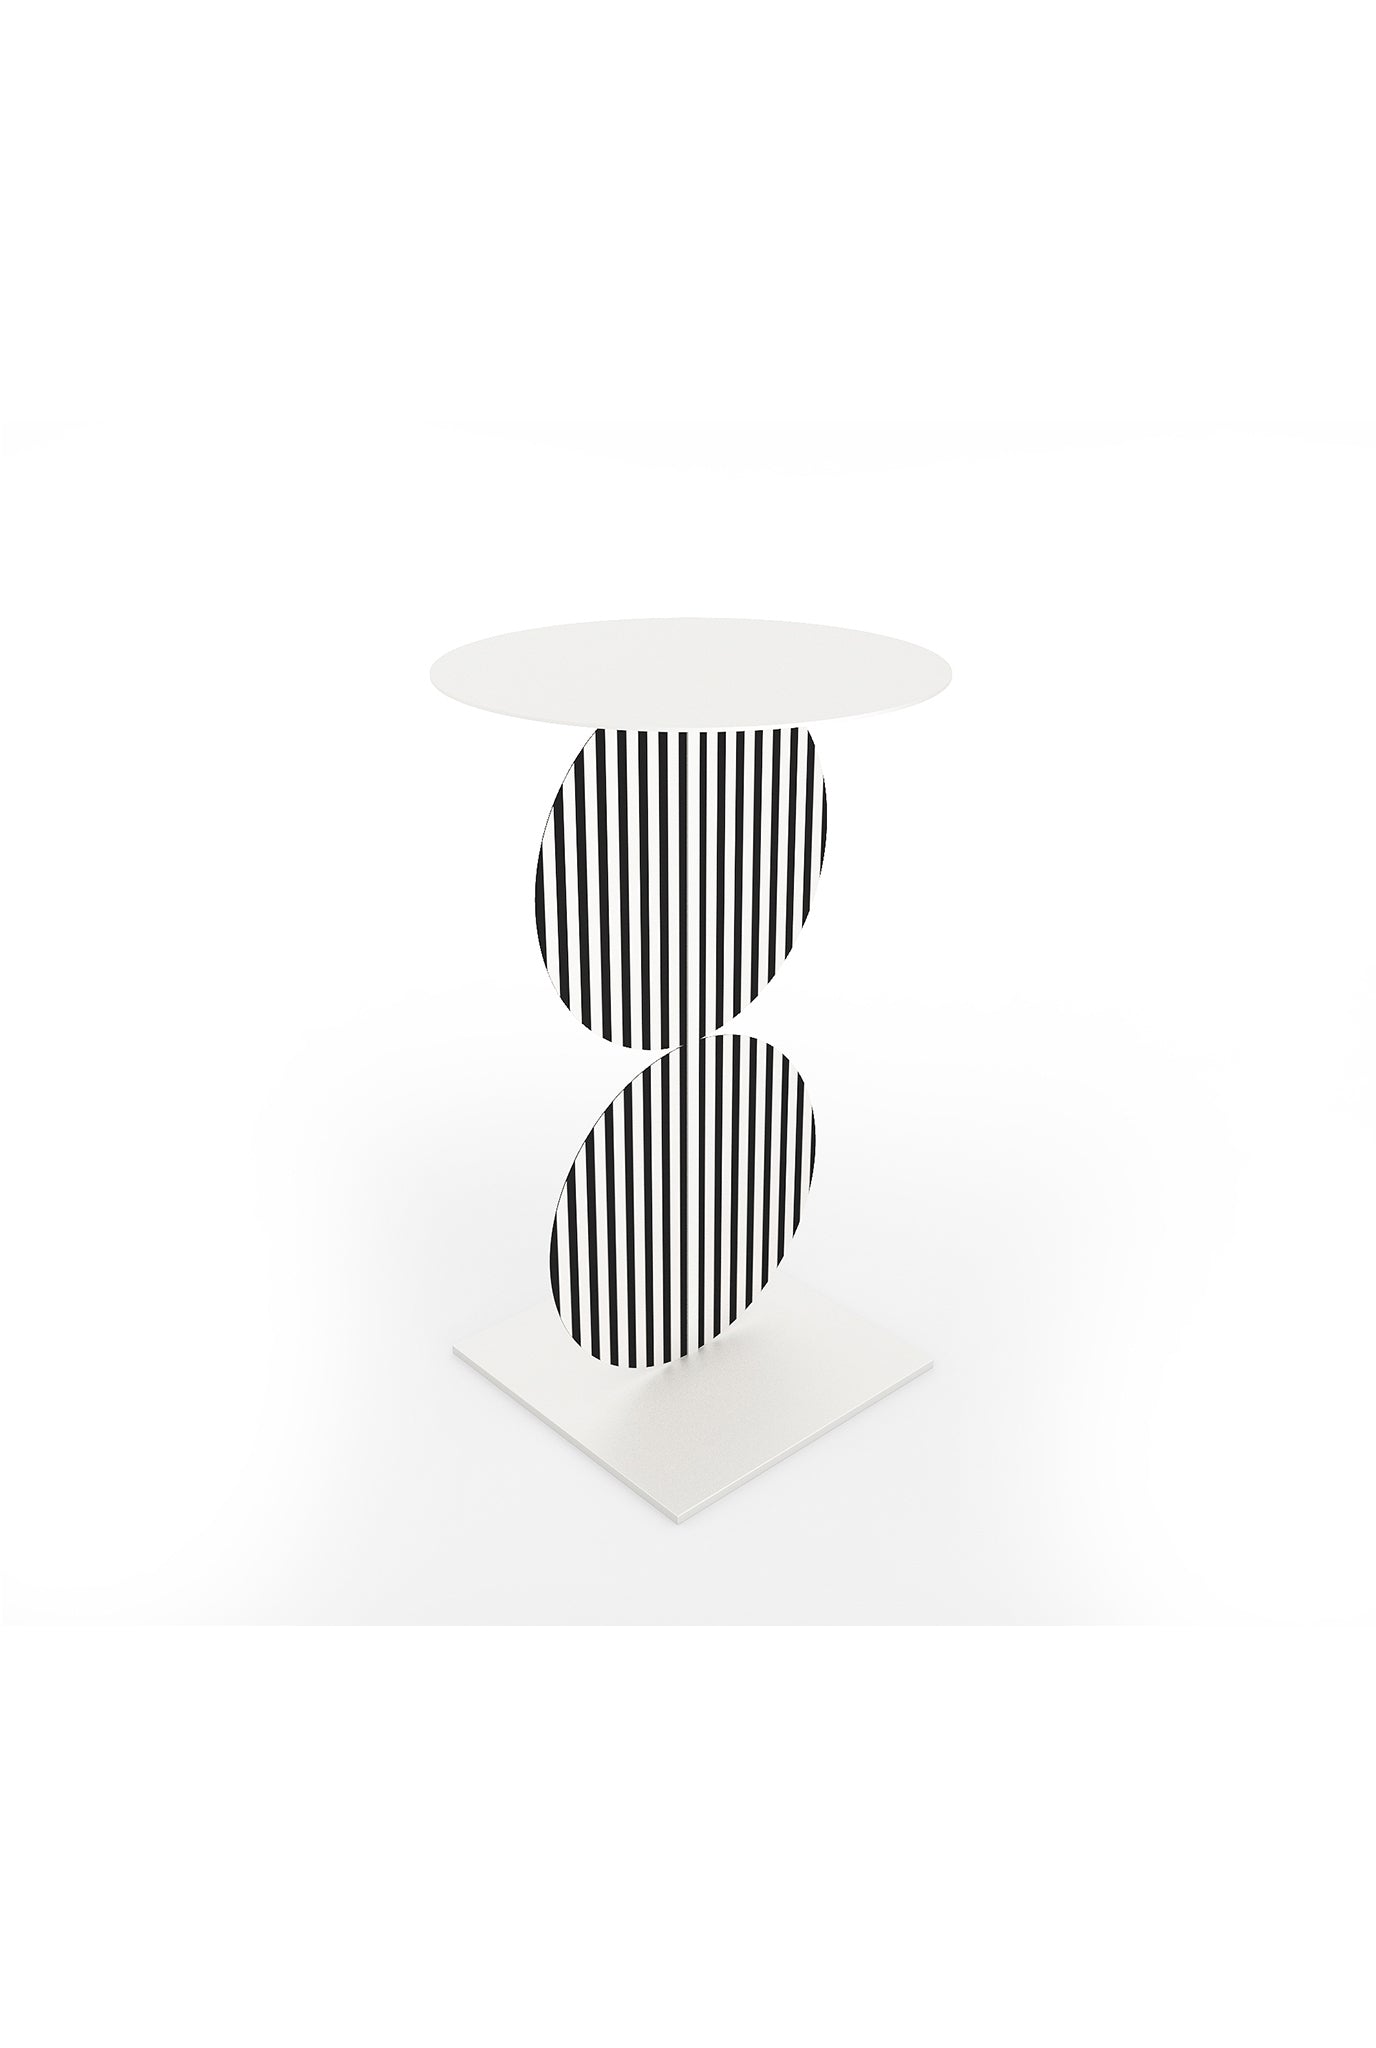 statement piece- handcrafted-striped-side-table-steel